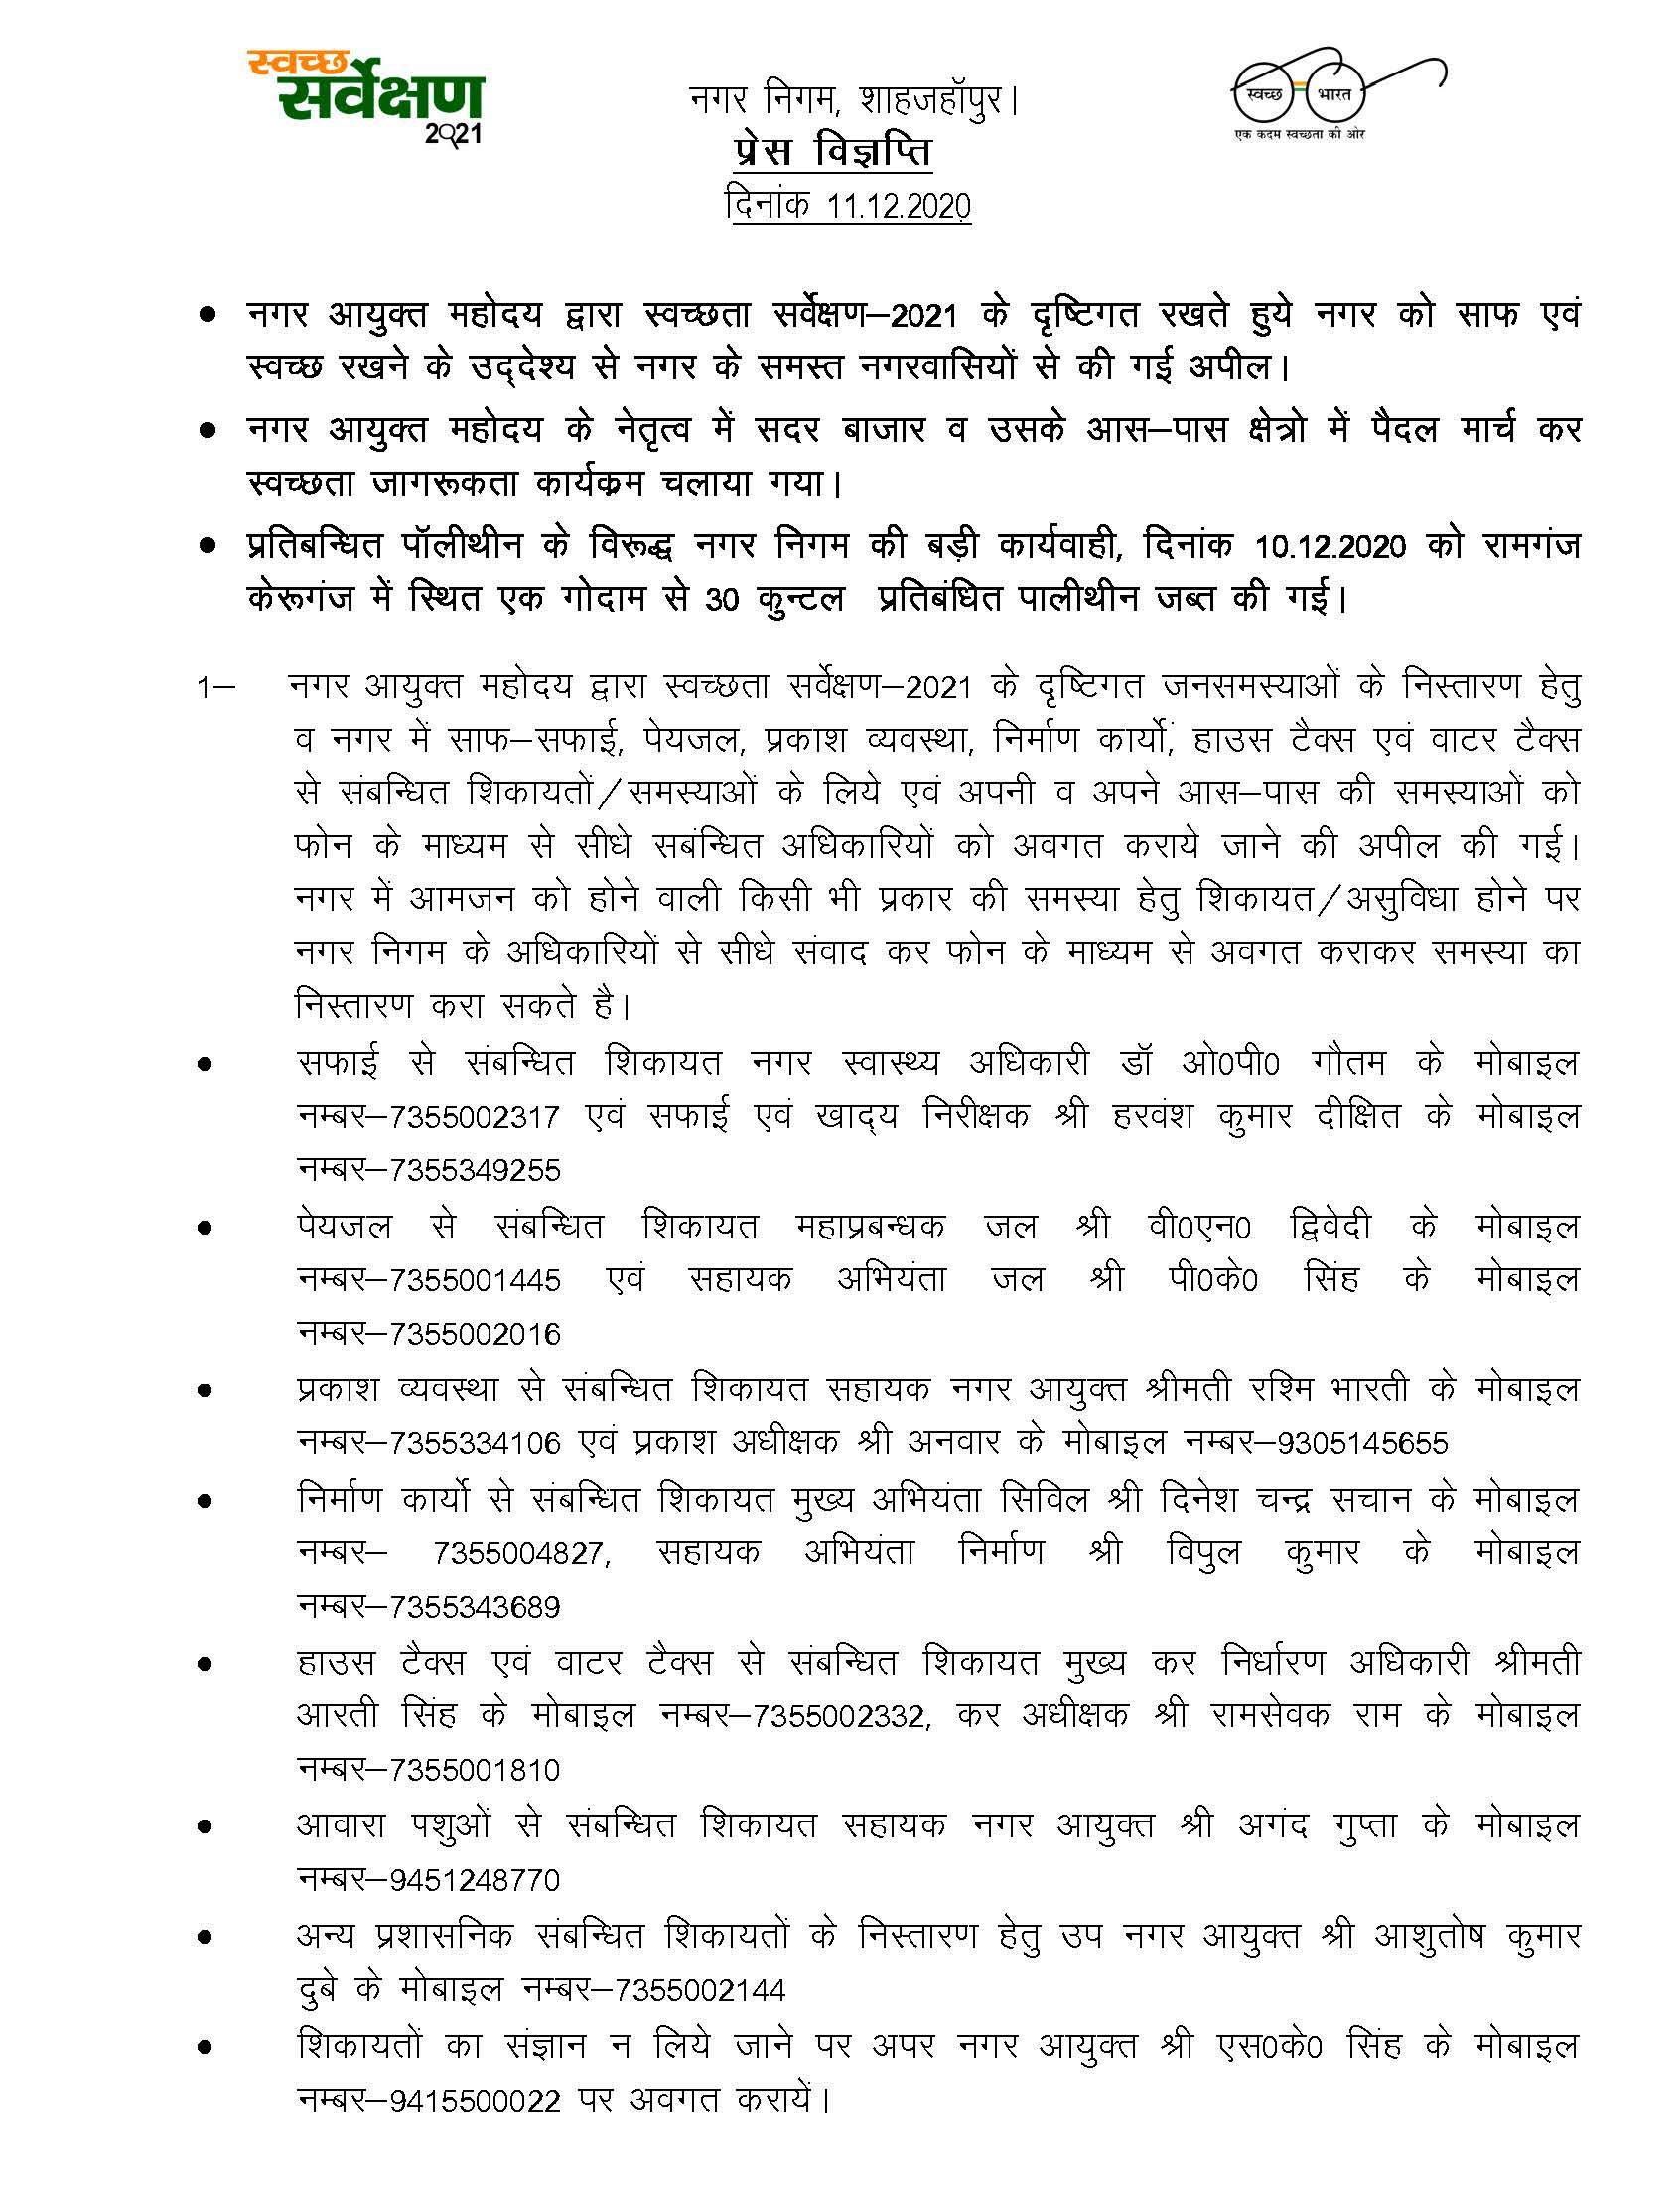 Regarding appeal made by Municipal Commissioner to all the citizens in view of the Cleanliness Survey-2021